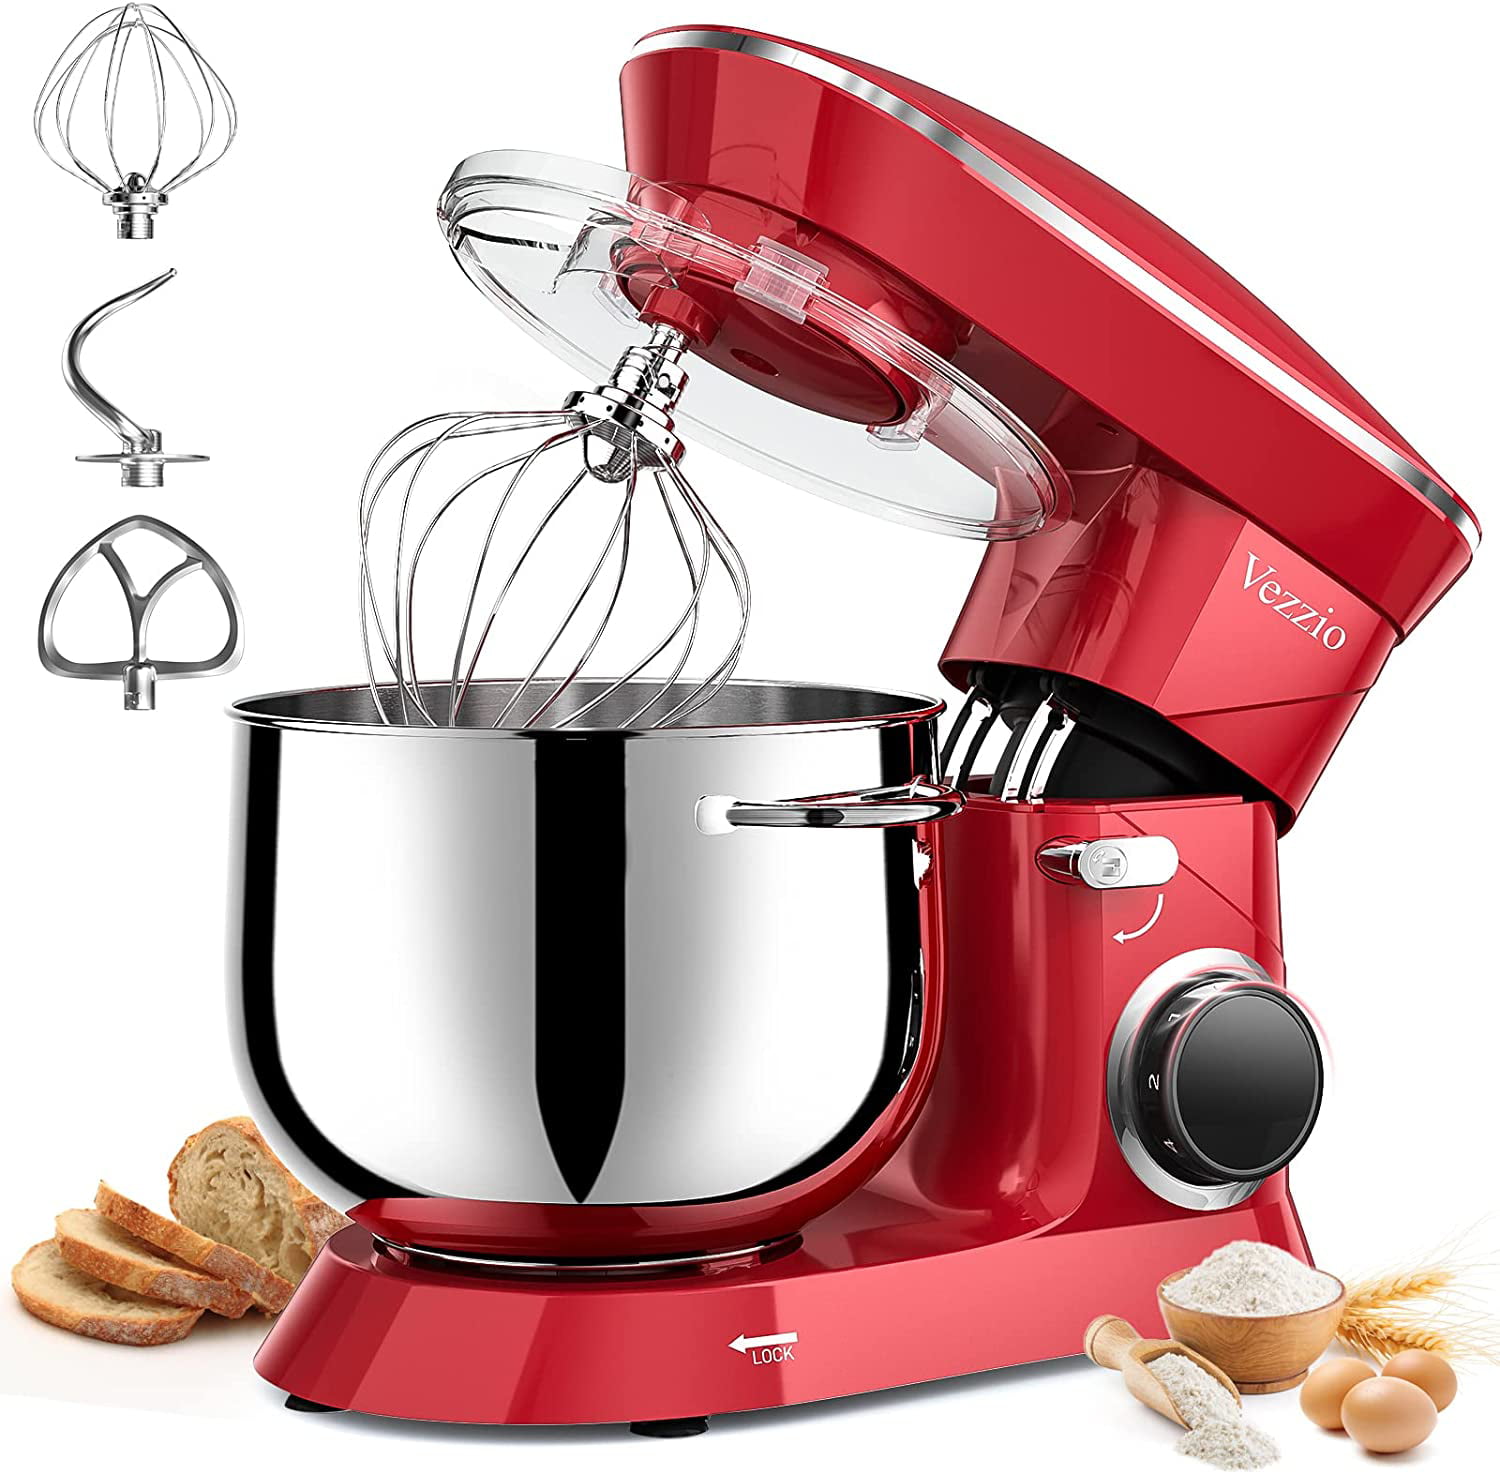 Afståelse millimeter Poleret 9.5 Qt Stand Mixer, 10-Speed Tilt-Head Food Mixer, Nathurium 660W Kitchen  Electric Mixer with Stainless Steel Bowl, Dishwasher-Safe Attachments for  Most Home Cooks (Red) - Walmart.com